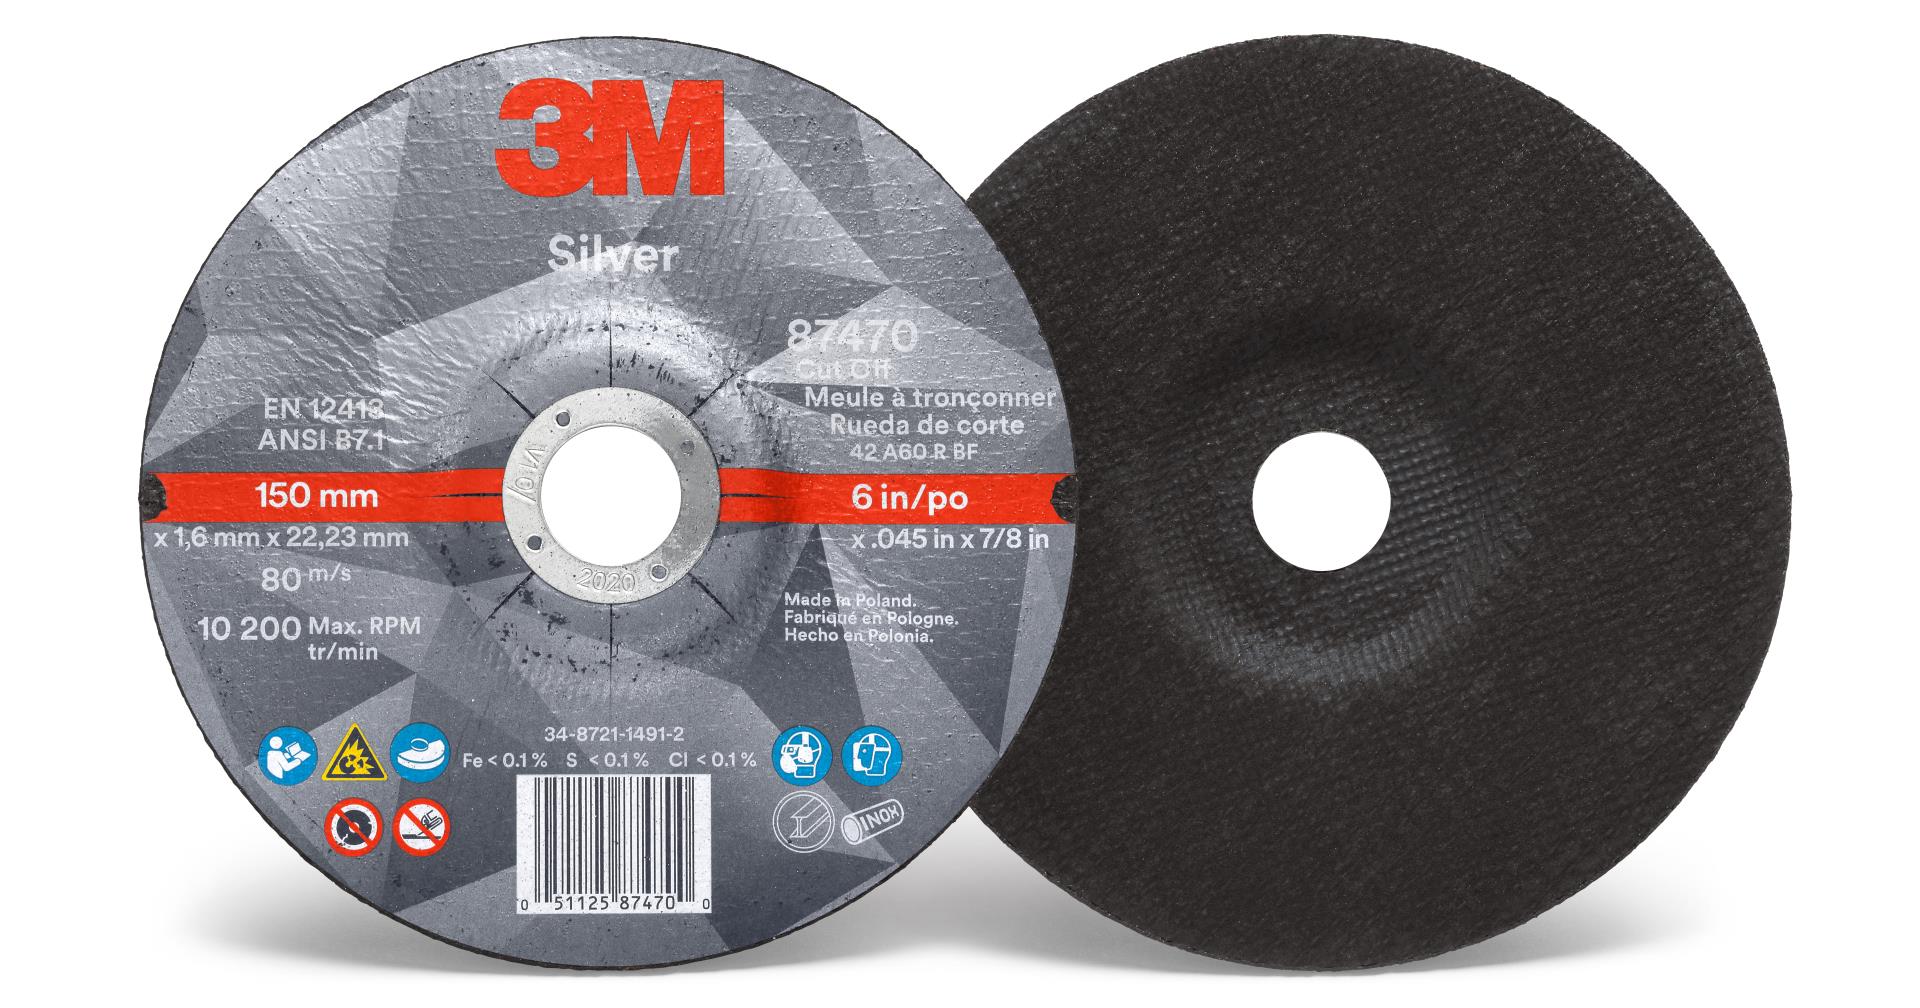 3M 10111MASS Heavy Duty Stripping Pad 3-1/2 x 5 in for Flat Surfaces 